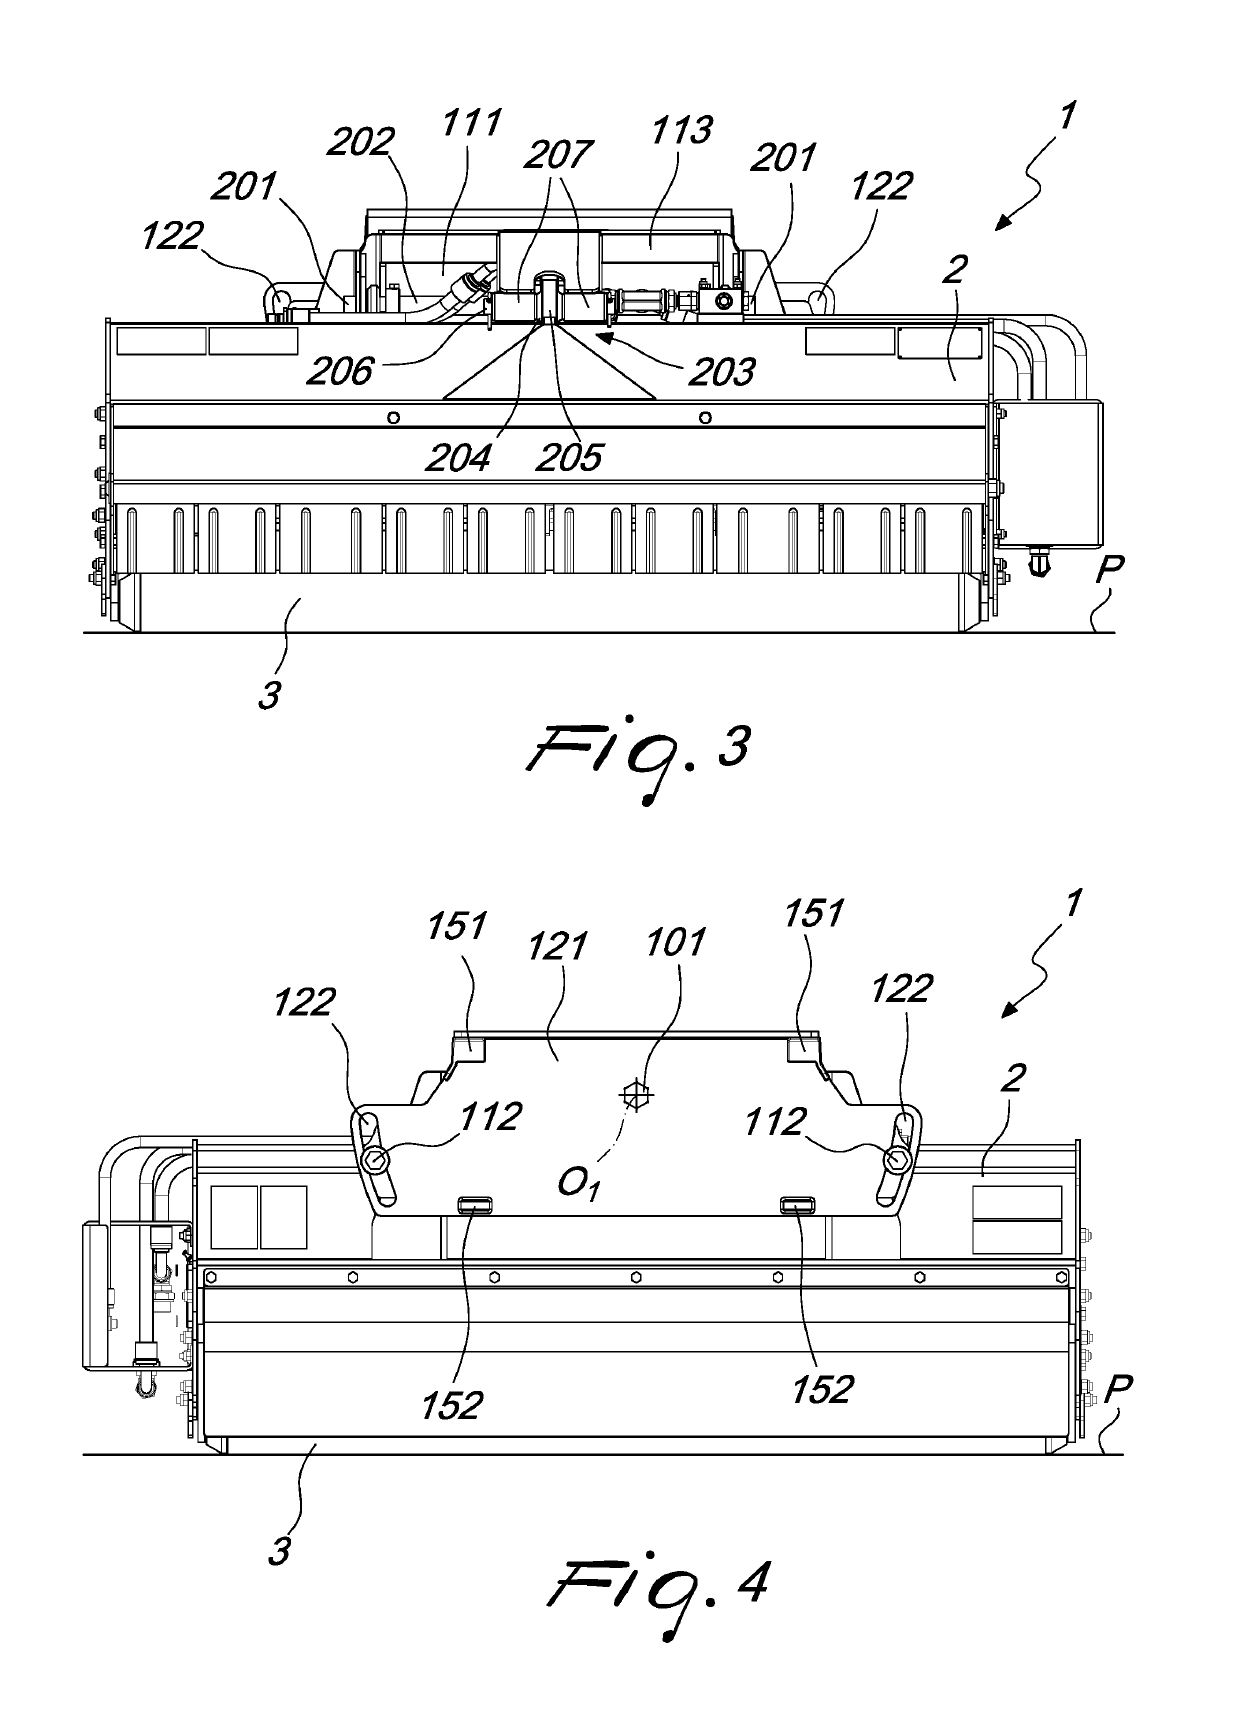 Coupling device for power-operated machines